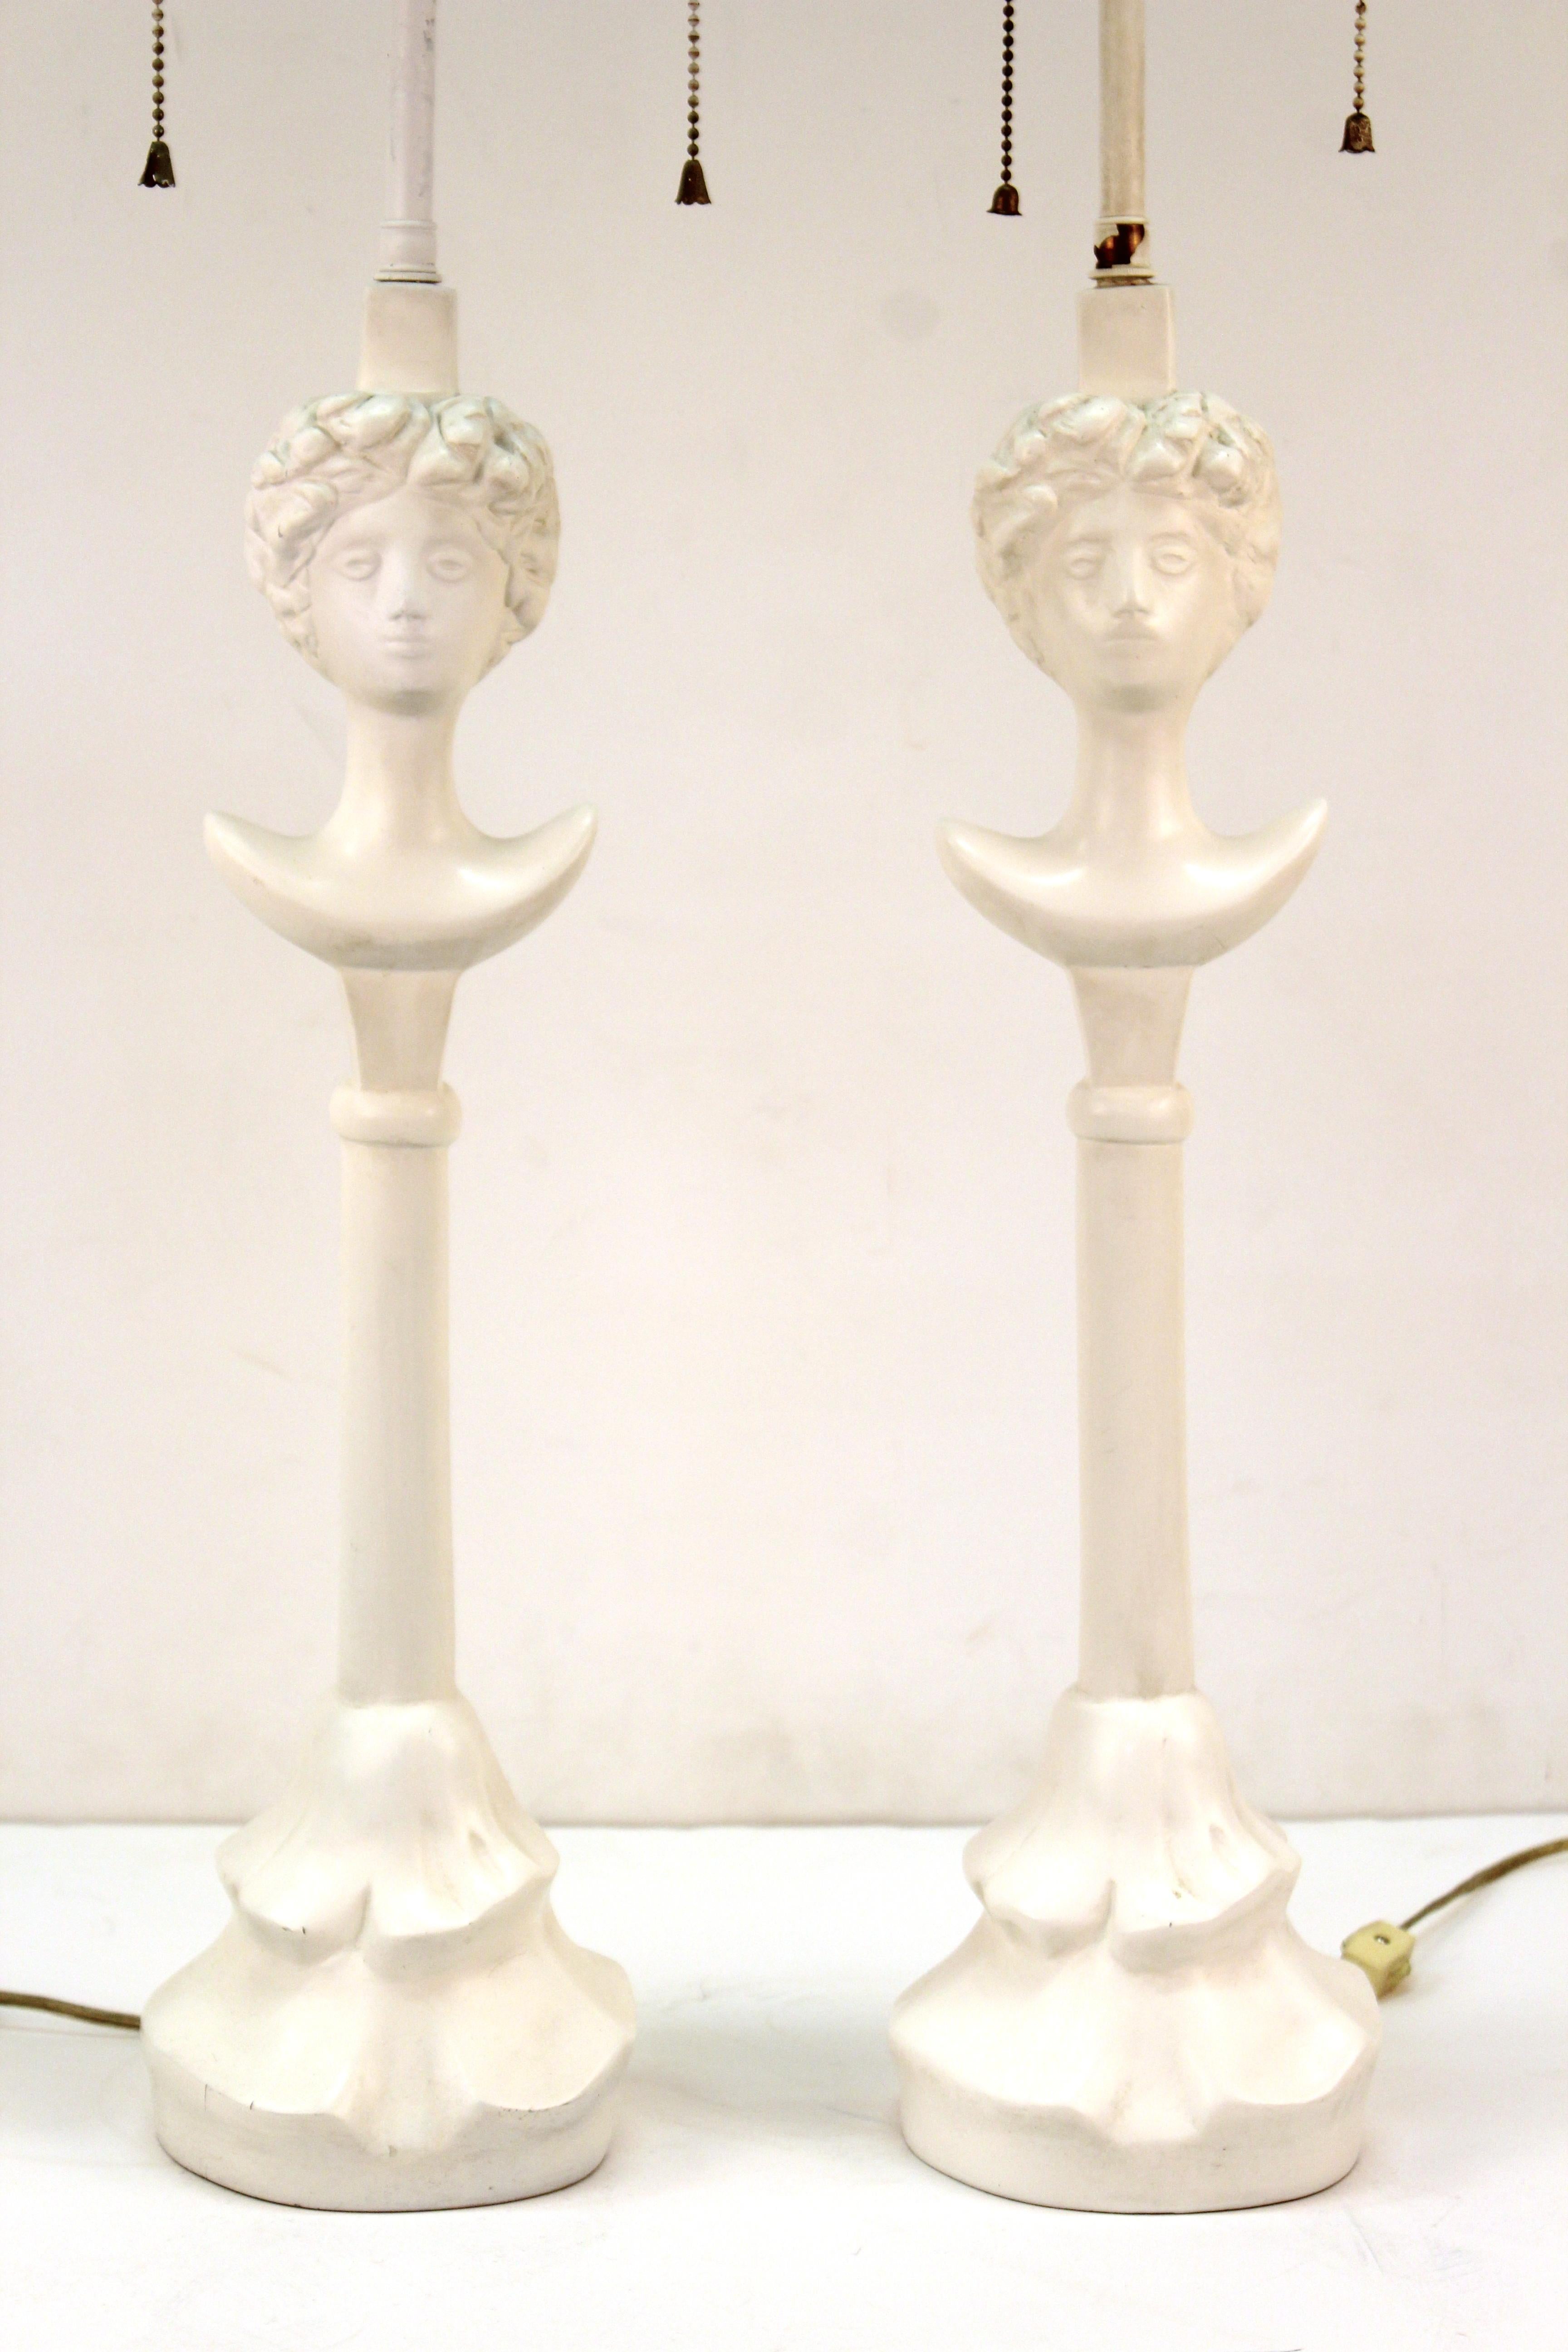 Pair of modern 'Tete de Femme' table lamps in the style of Diego Giacometti. The pair is made of white painted plaster over metal. In great vintage condition with age-appropriate wear and use.